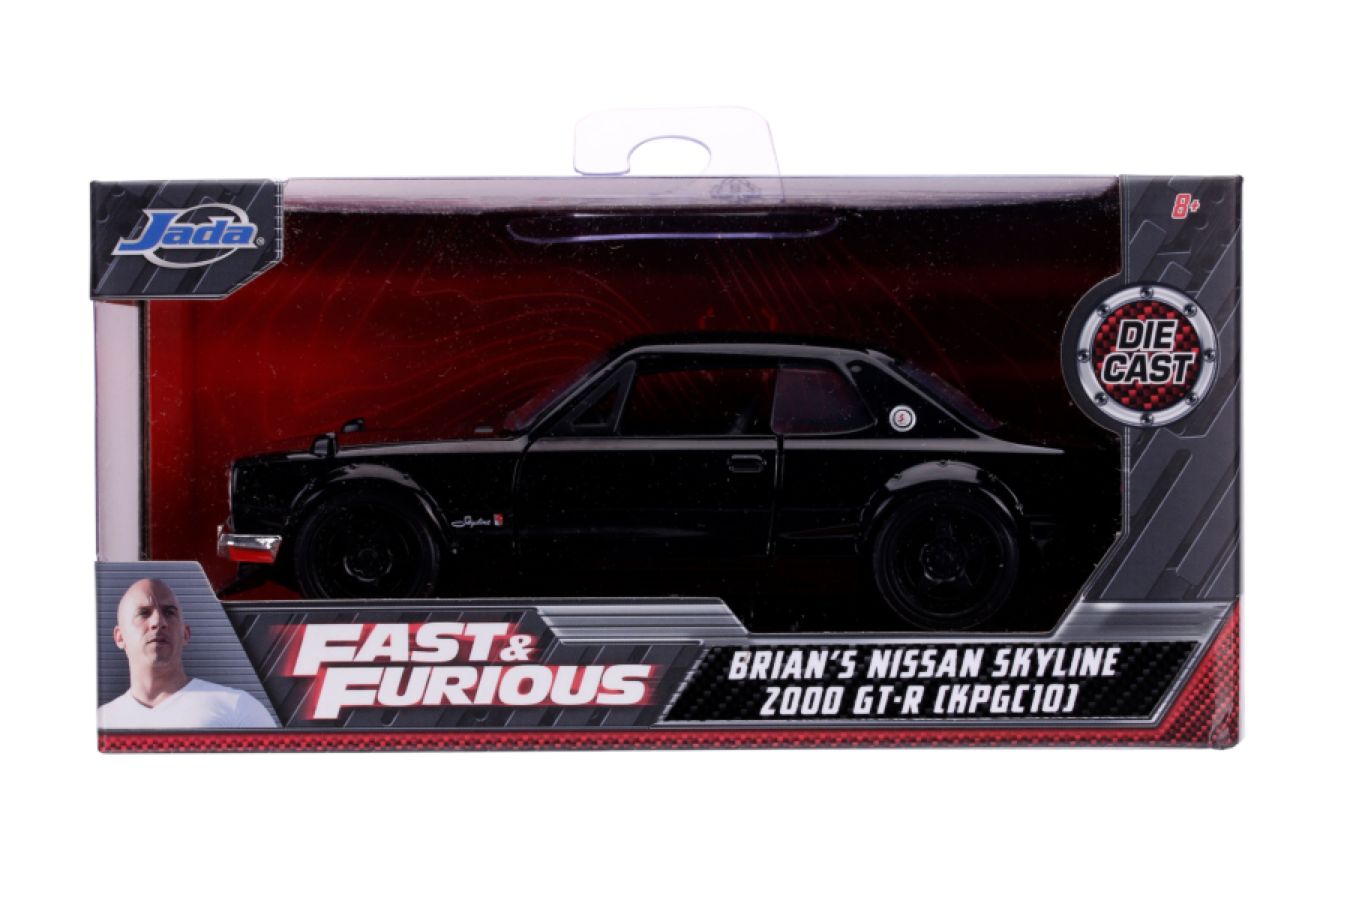 Fast & Furious - Brian's '71 Nissan Skyline 2000 GT-R 1:32 Scale Hollywood Ride